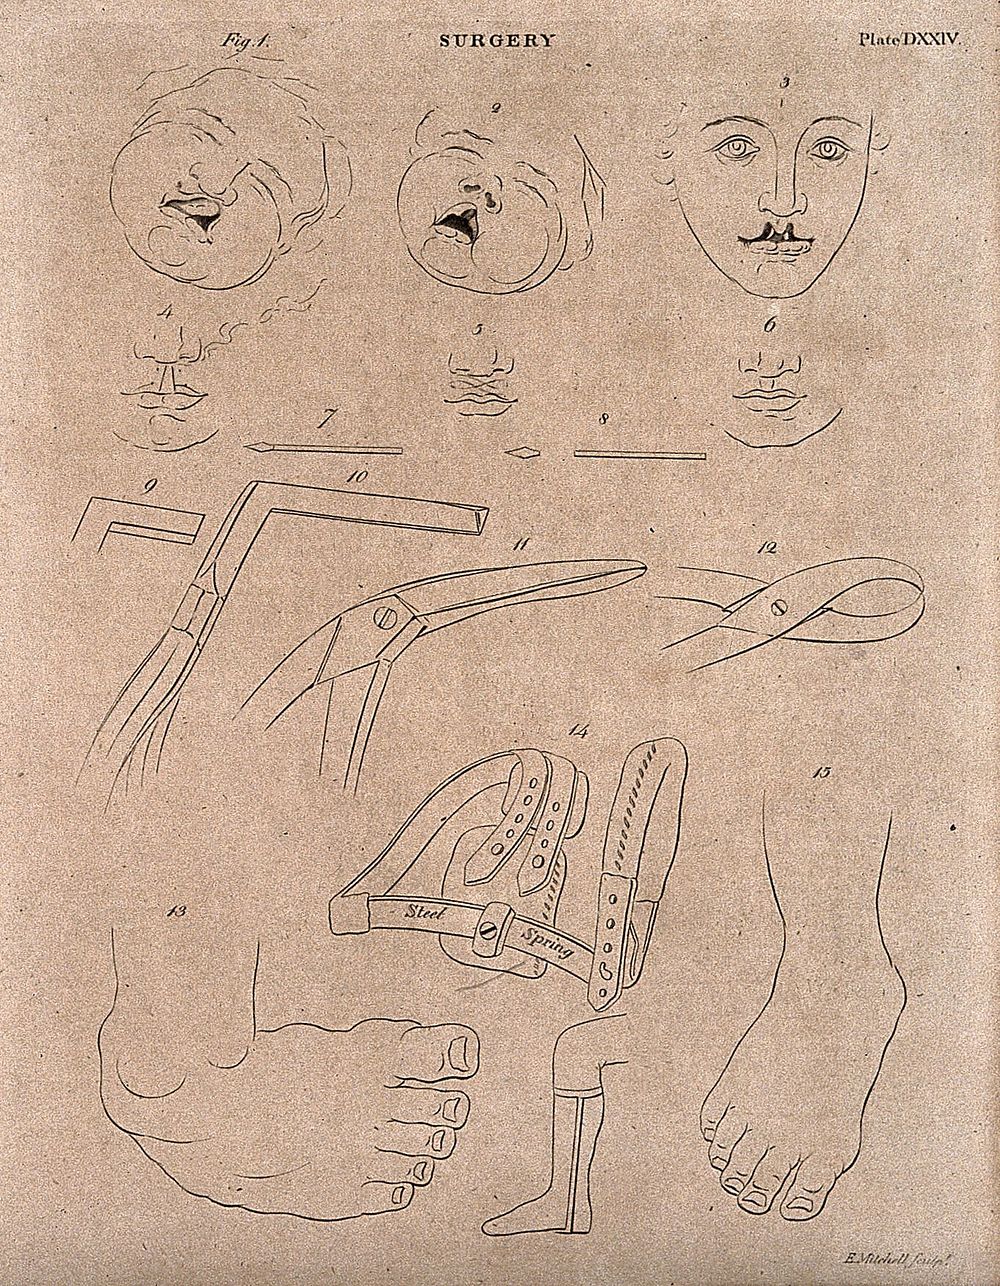 Surgical instruments to correct cleft lip. Engraving by E. Mitchell.